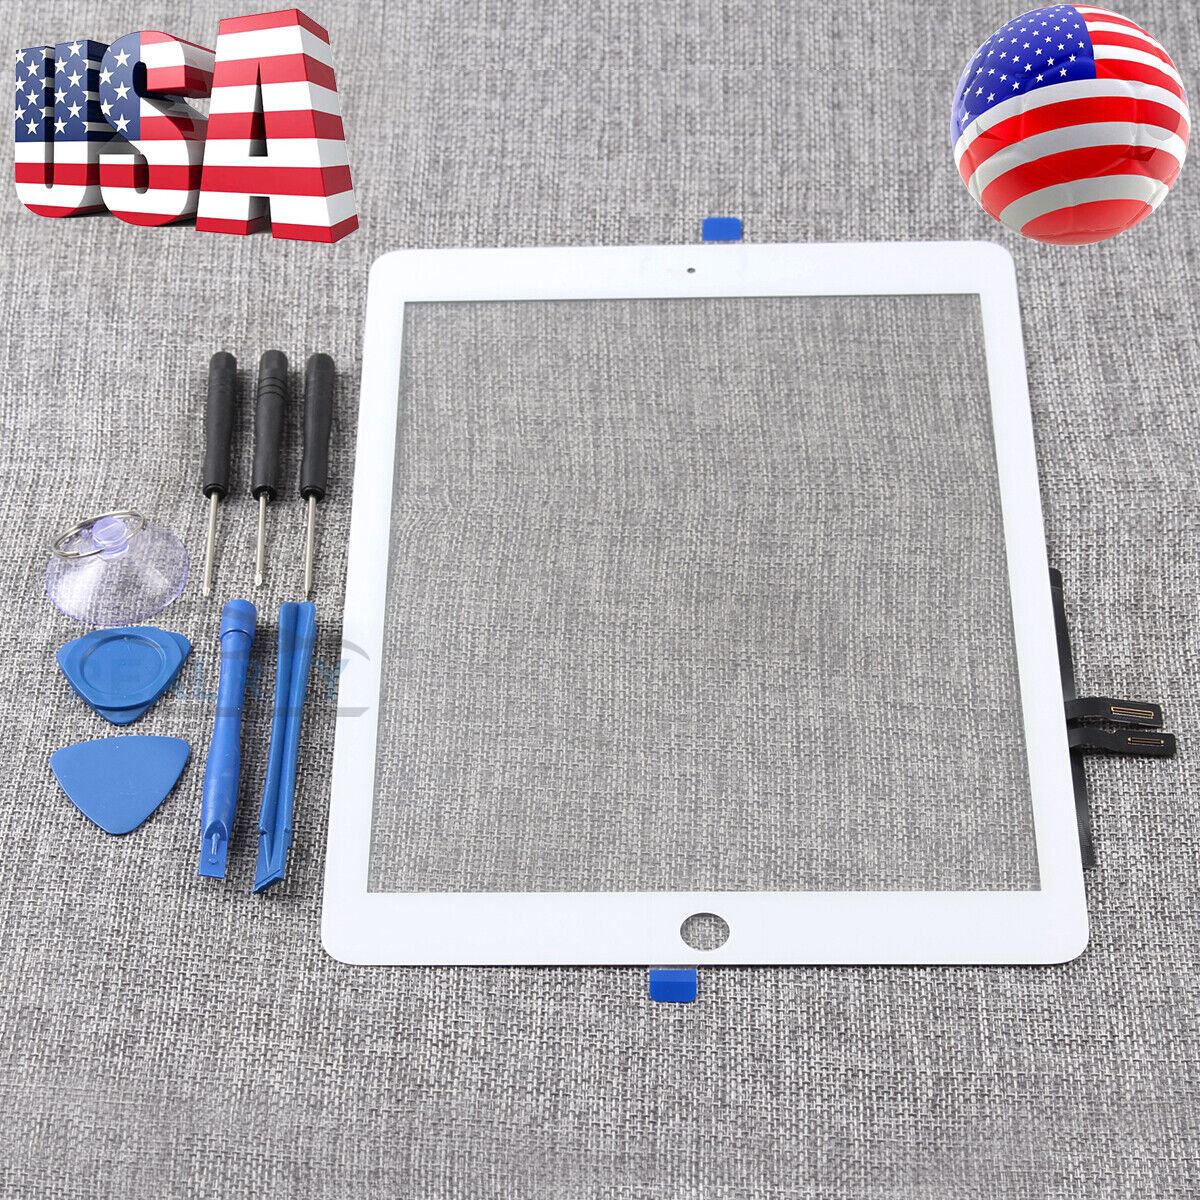 White LCD Touch Screen Digitizer Replacement For 2018 iPad 6 6th Gen A1893 A1954